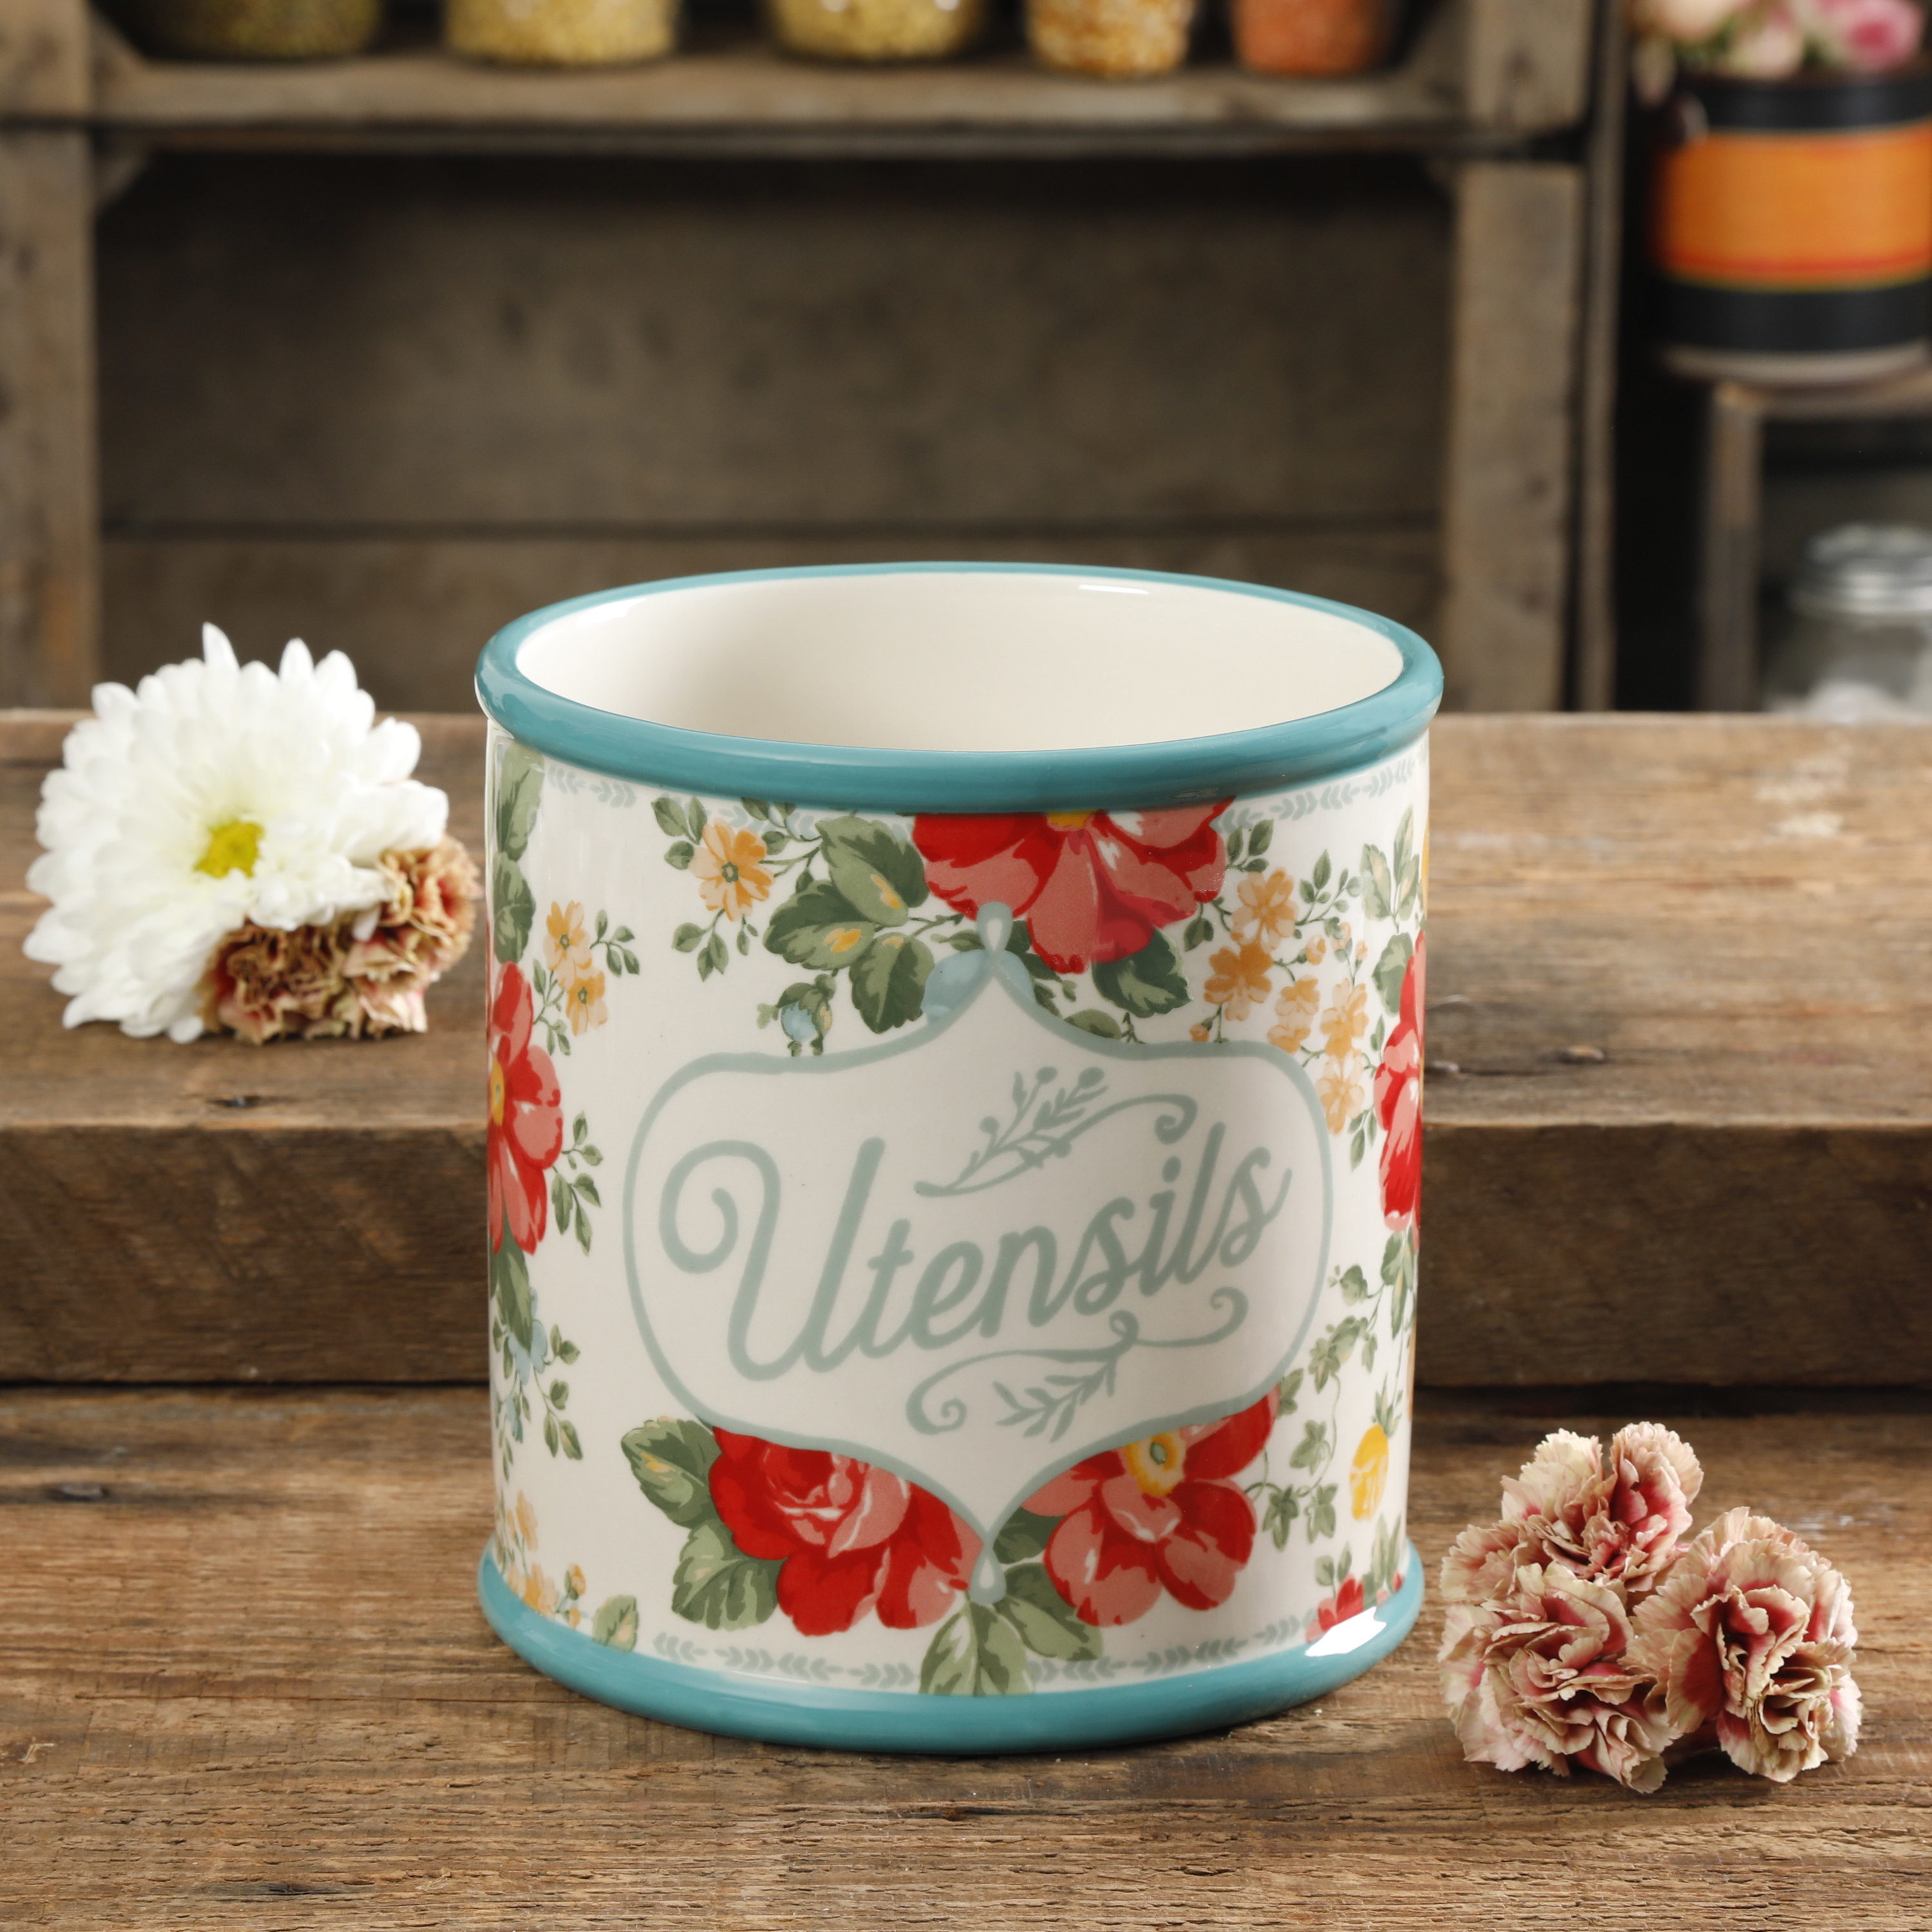 The Pioneer Woman floral kitchen utensil holder sitting on a table